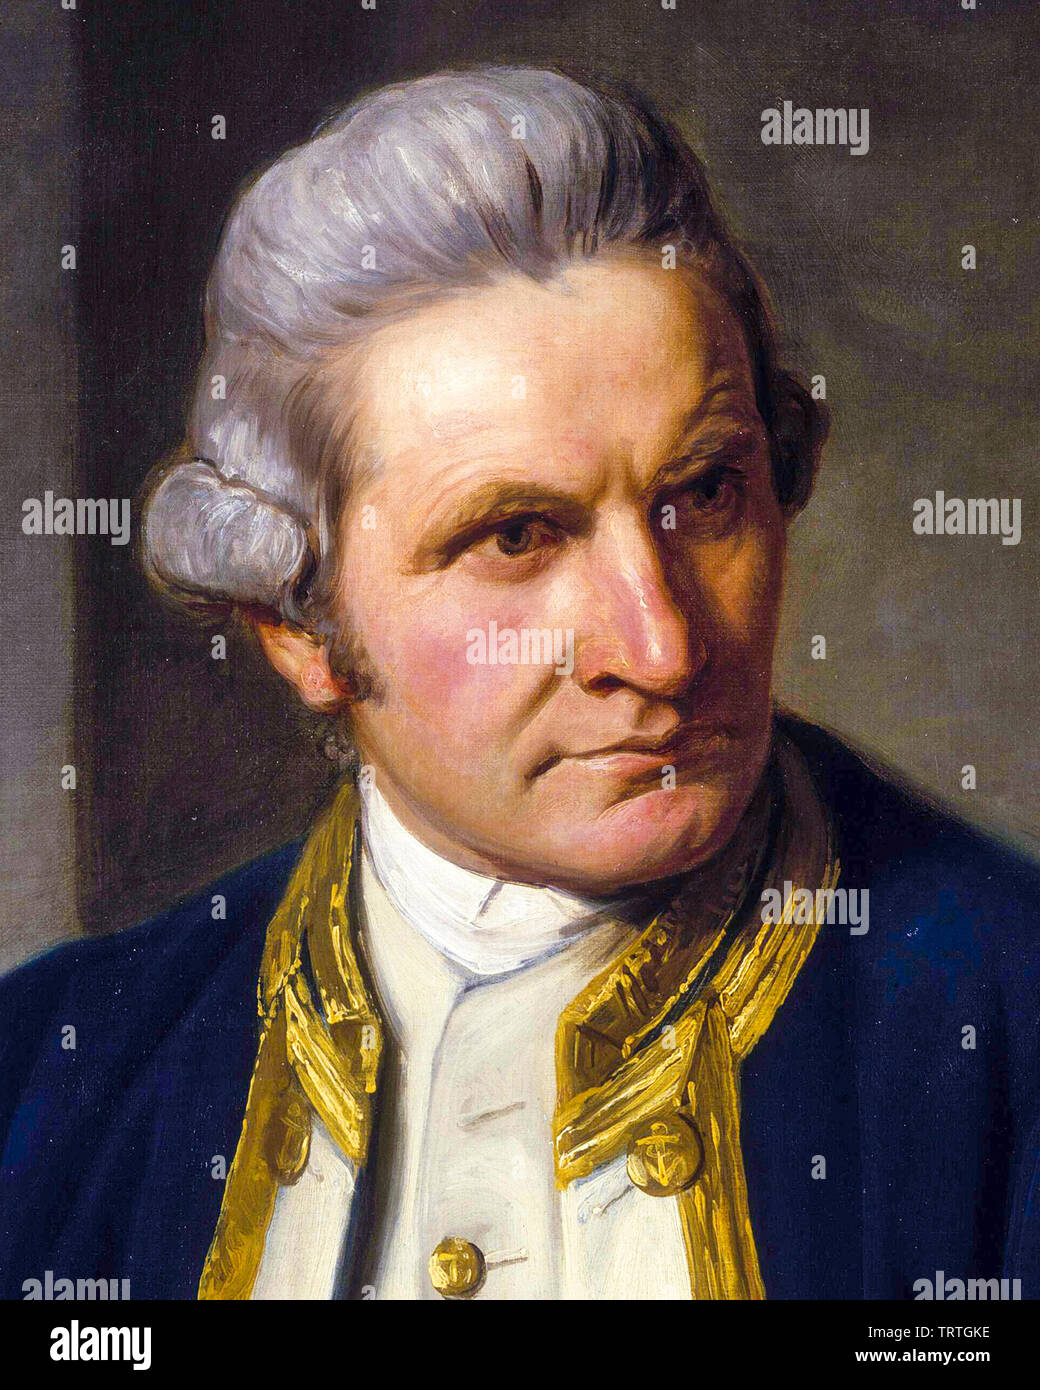 Captain cook portrait stock images and Alamy hi-res photography 